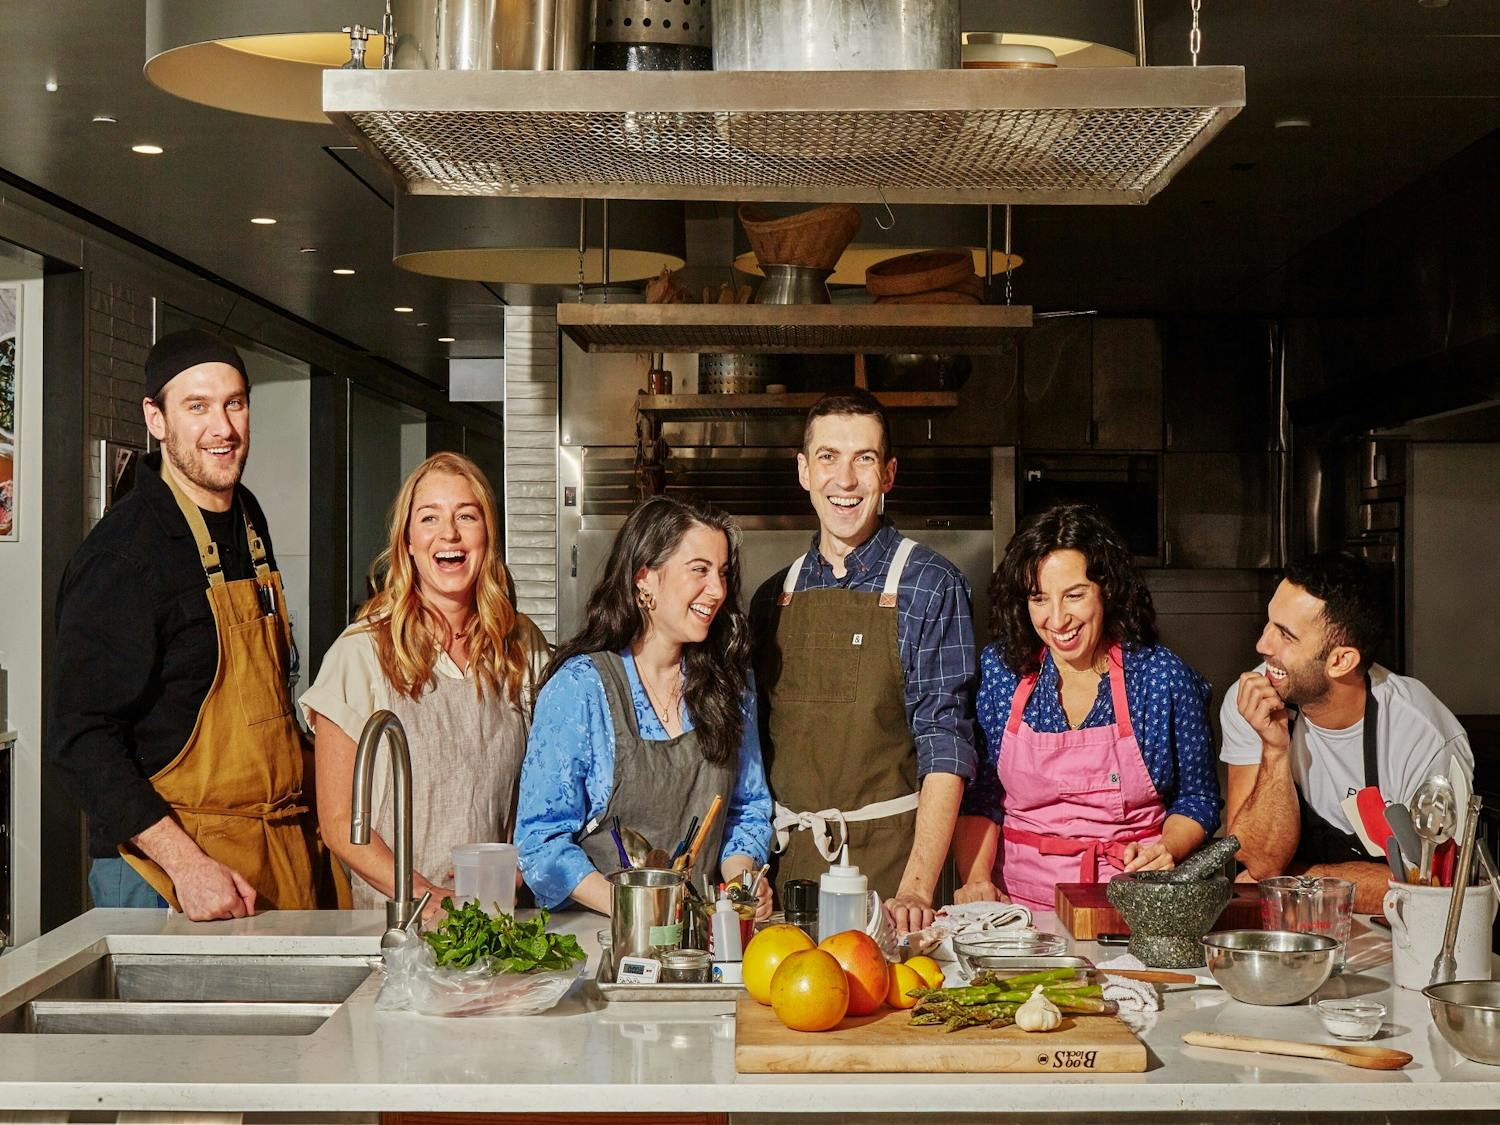 Popular YouTube show Bon Appetit Test Kitchen attempts to relaunch itself with a new slate of chefs after over a year of backlash regarding its treatment of its BIPOC employees.